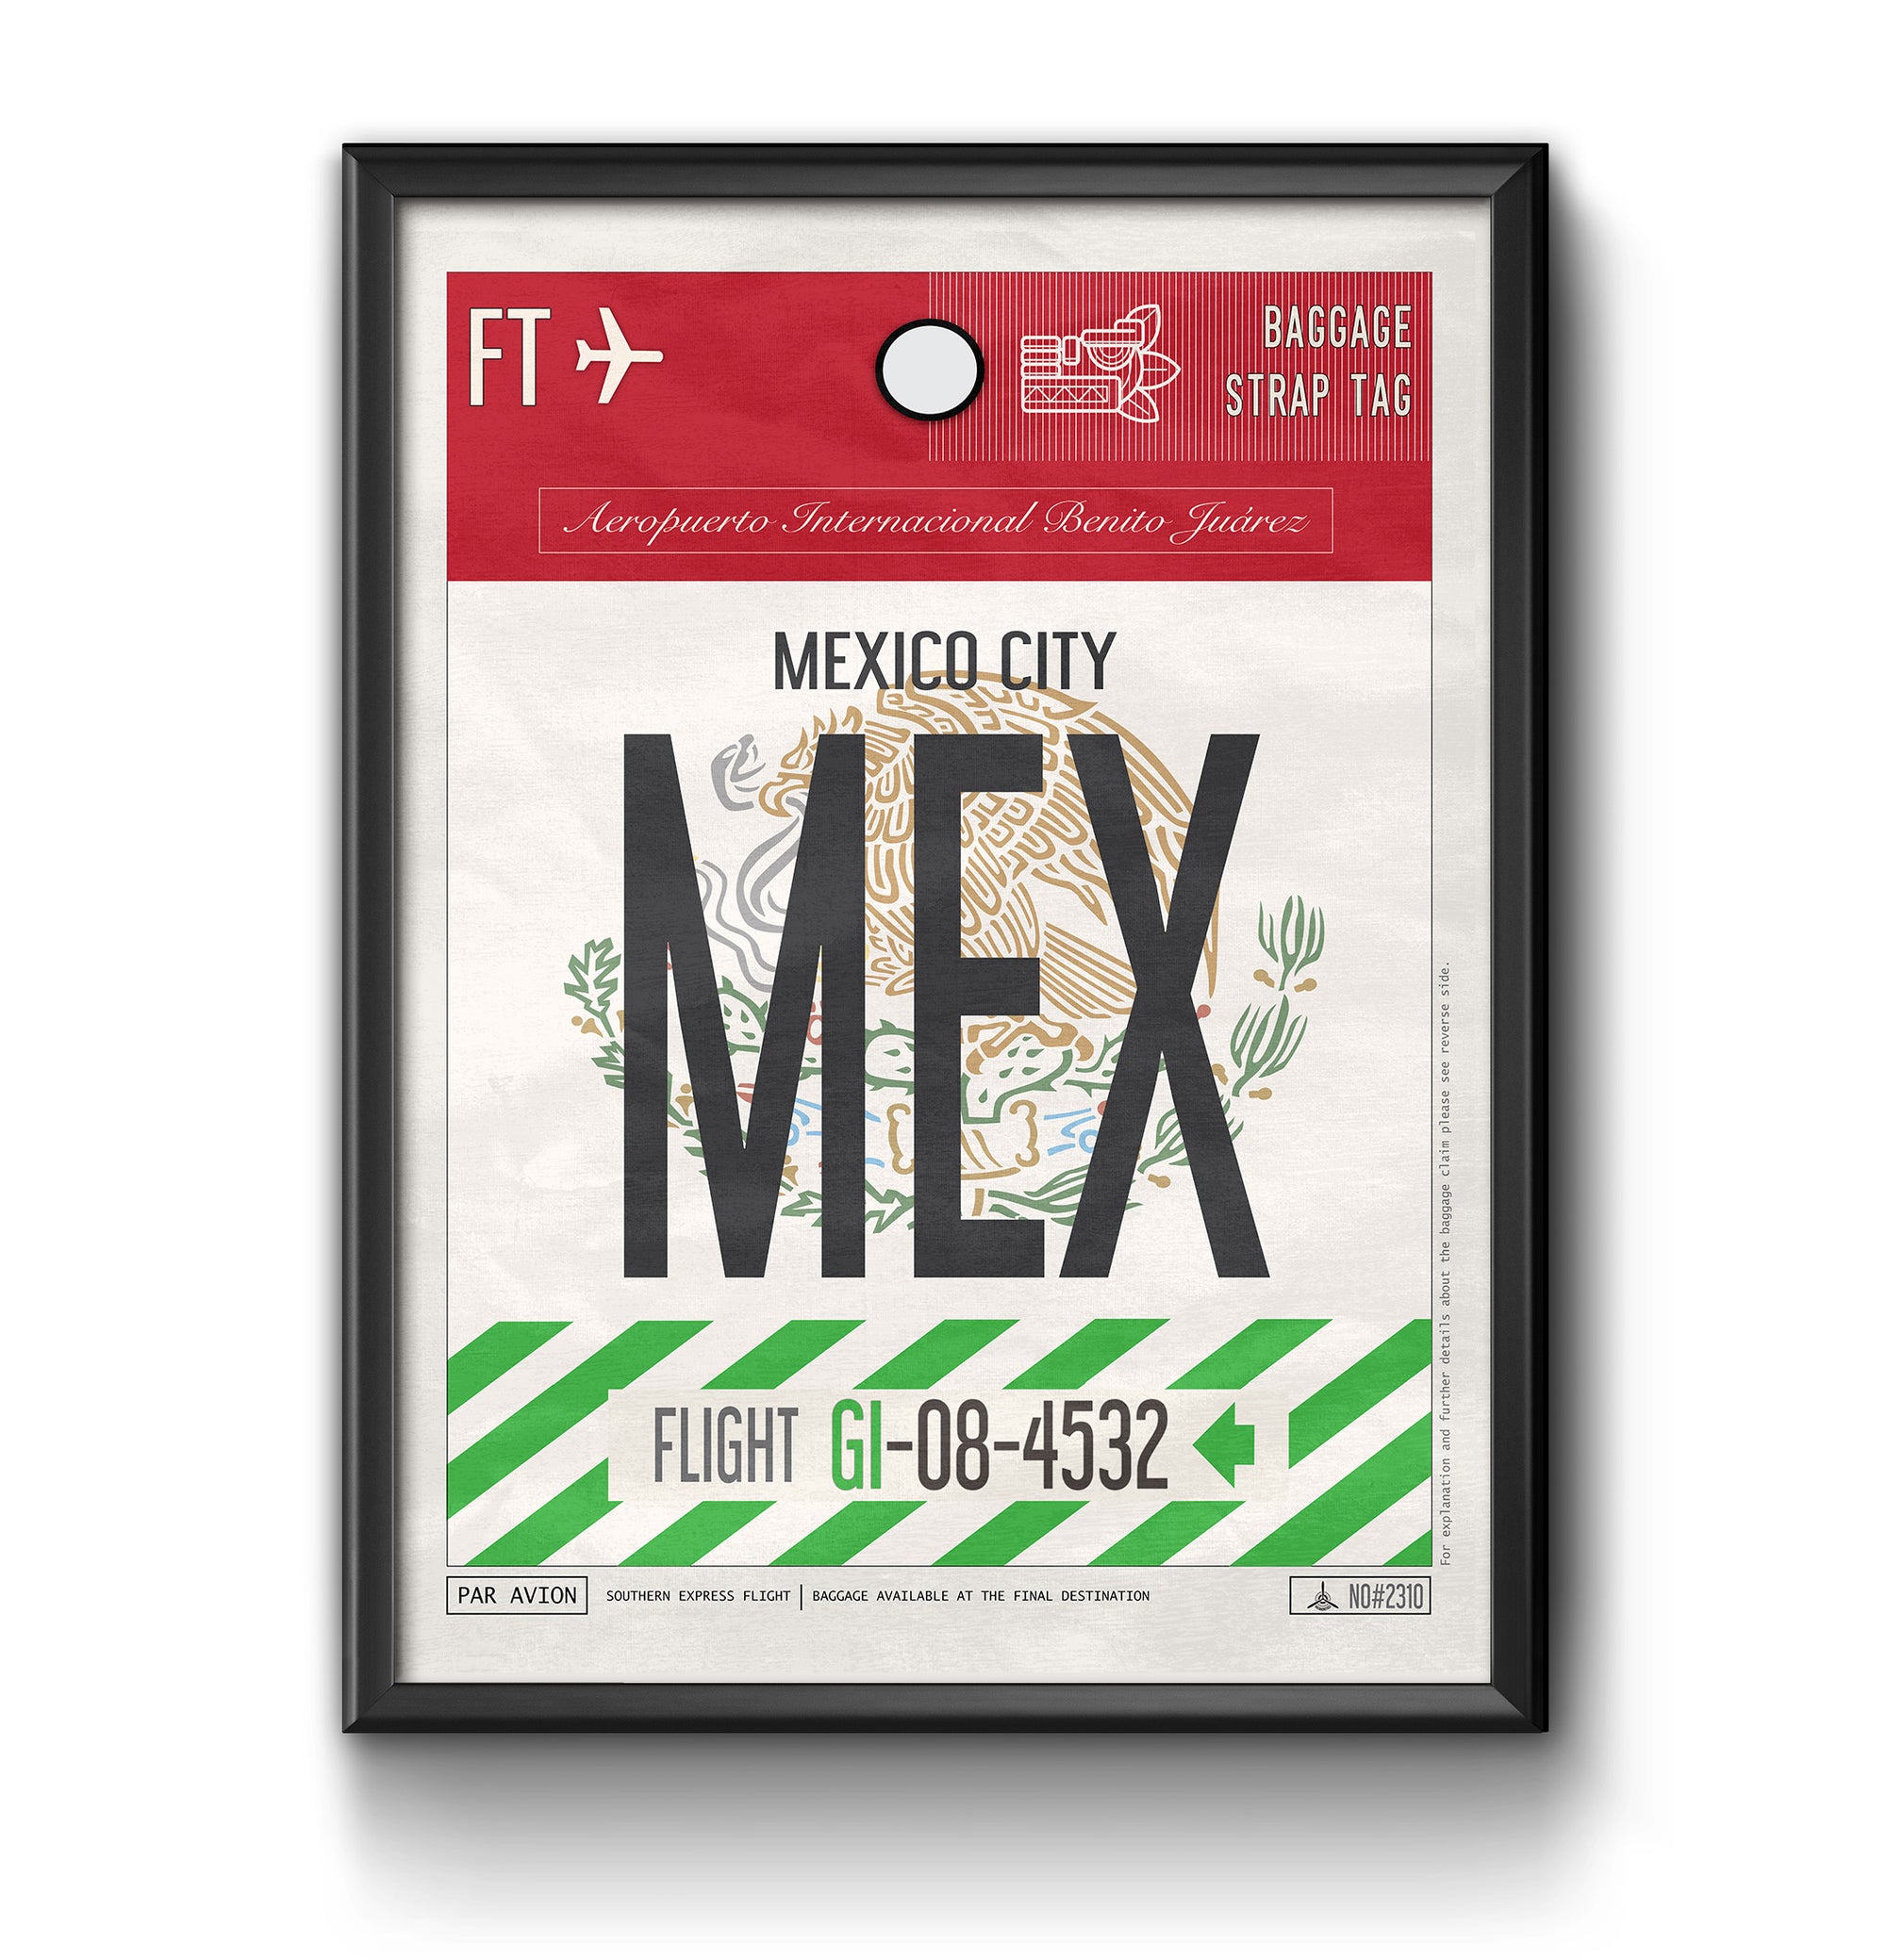 Mexico City MEX airport tag poster luggage tag 